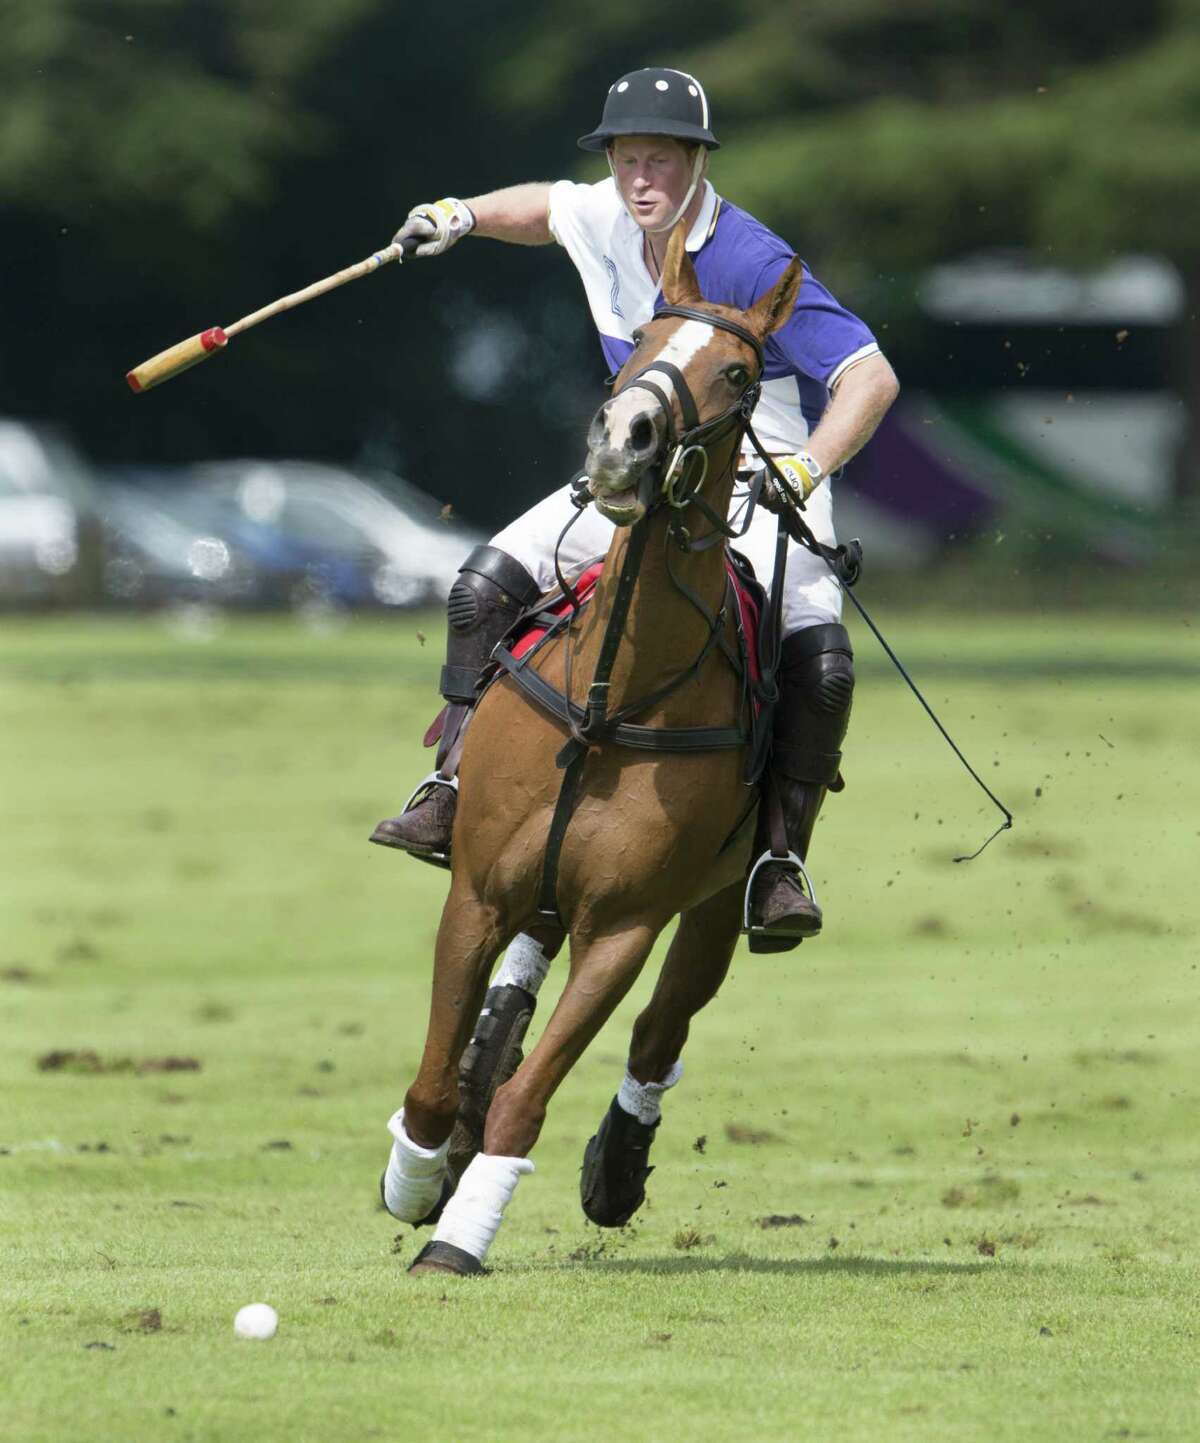 Prince Harry playing in the 2012 Jerudong Trophy Polo Match at Cirencester Park Polo Club in England. BritainâÄôs Prince Harry,the youngest son of Prince Charles and the late Princess Diana is scheduled to compete in a polo match in Greenwich, Conn. in May. The event will benefit Sentebale, a charity he co-founded to help impoverished children in the African nation of Lesotho.